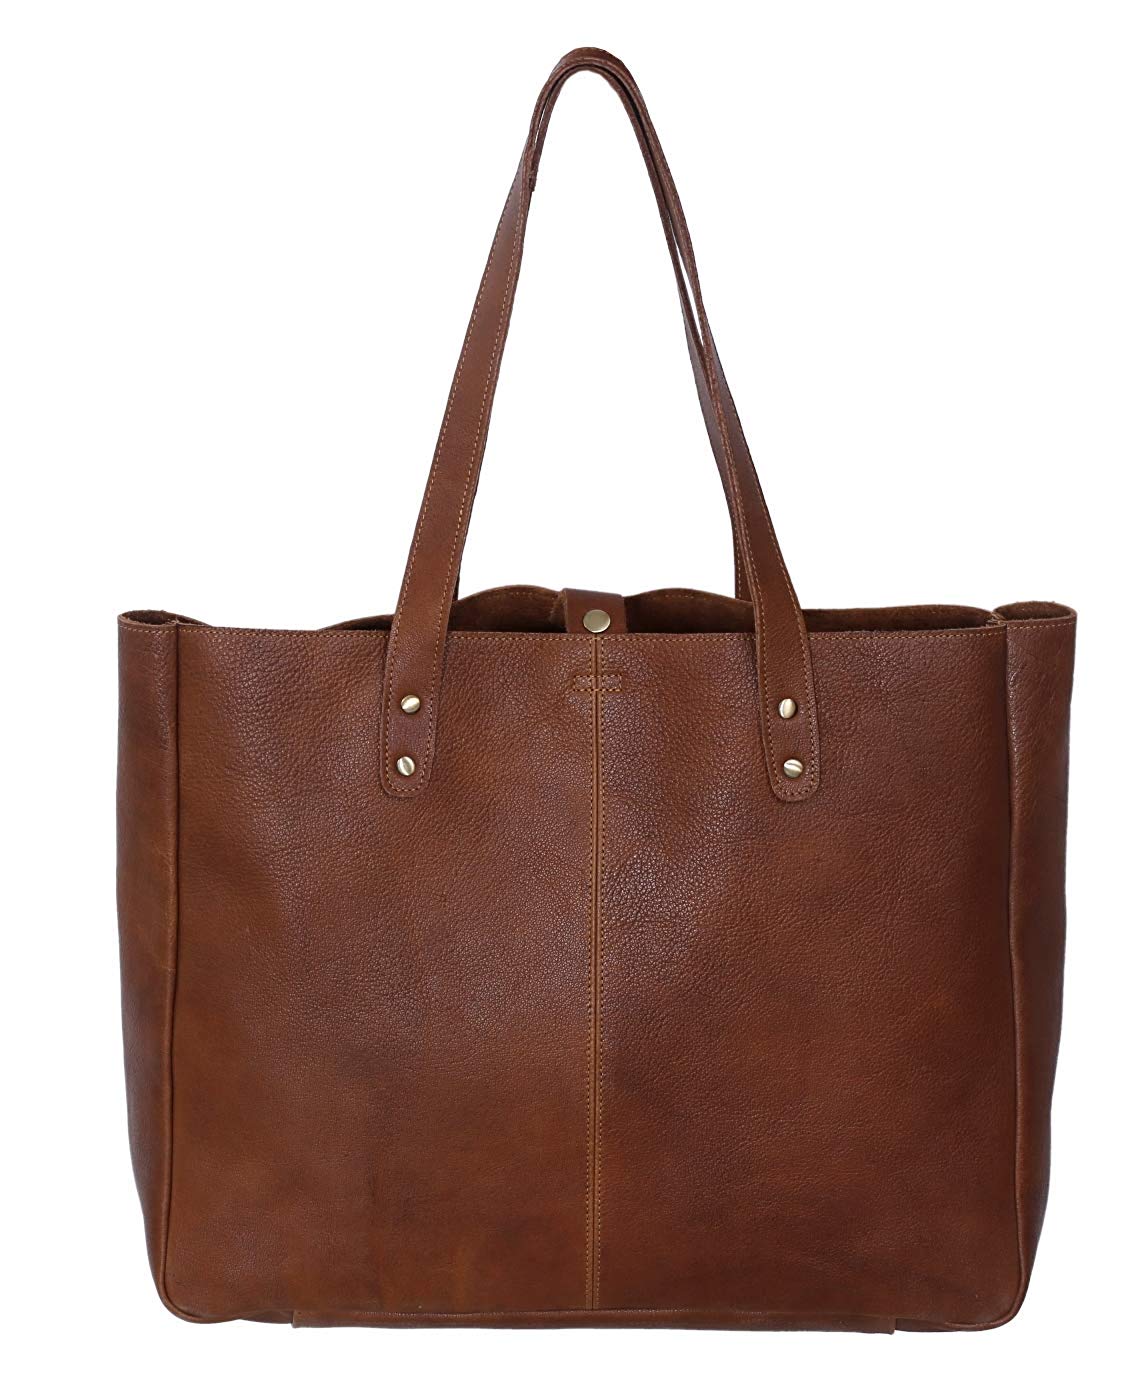 Buy PRERNA Real Leather Bag Tote Bag for Women Bucket Style Medium Size  (Dark Brown) at Amazon.in